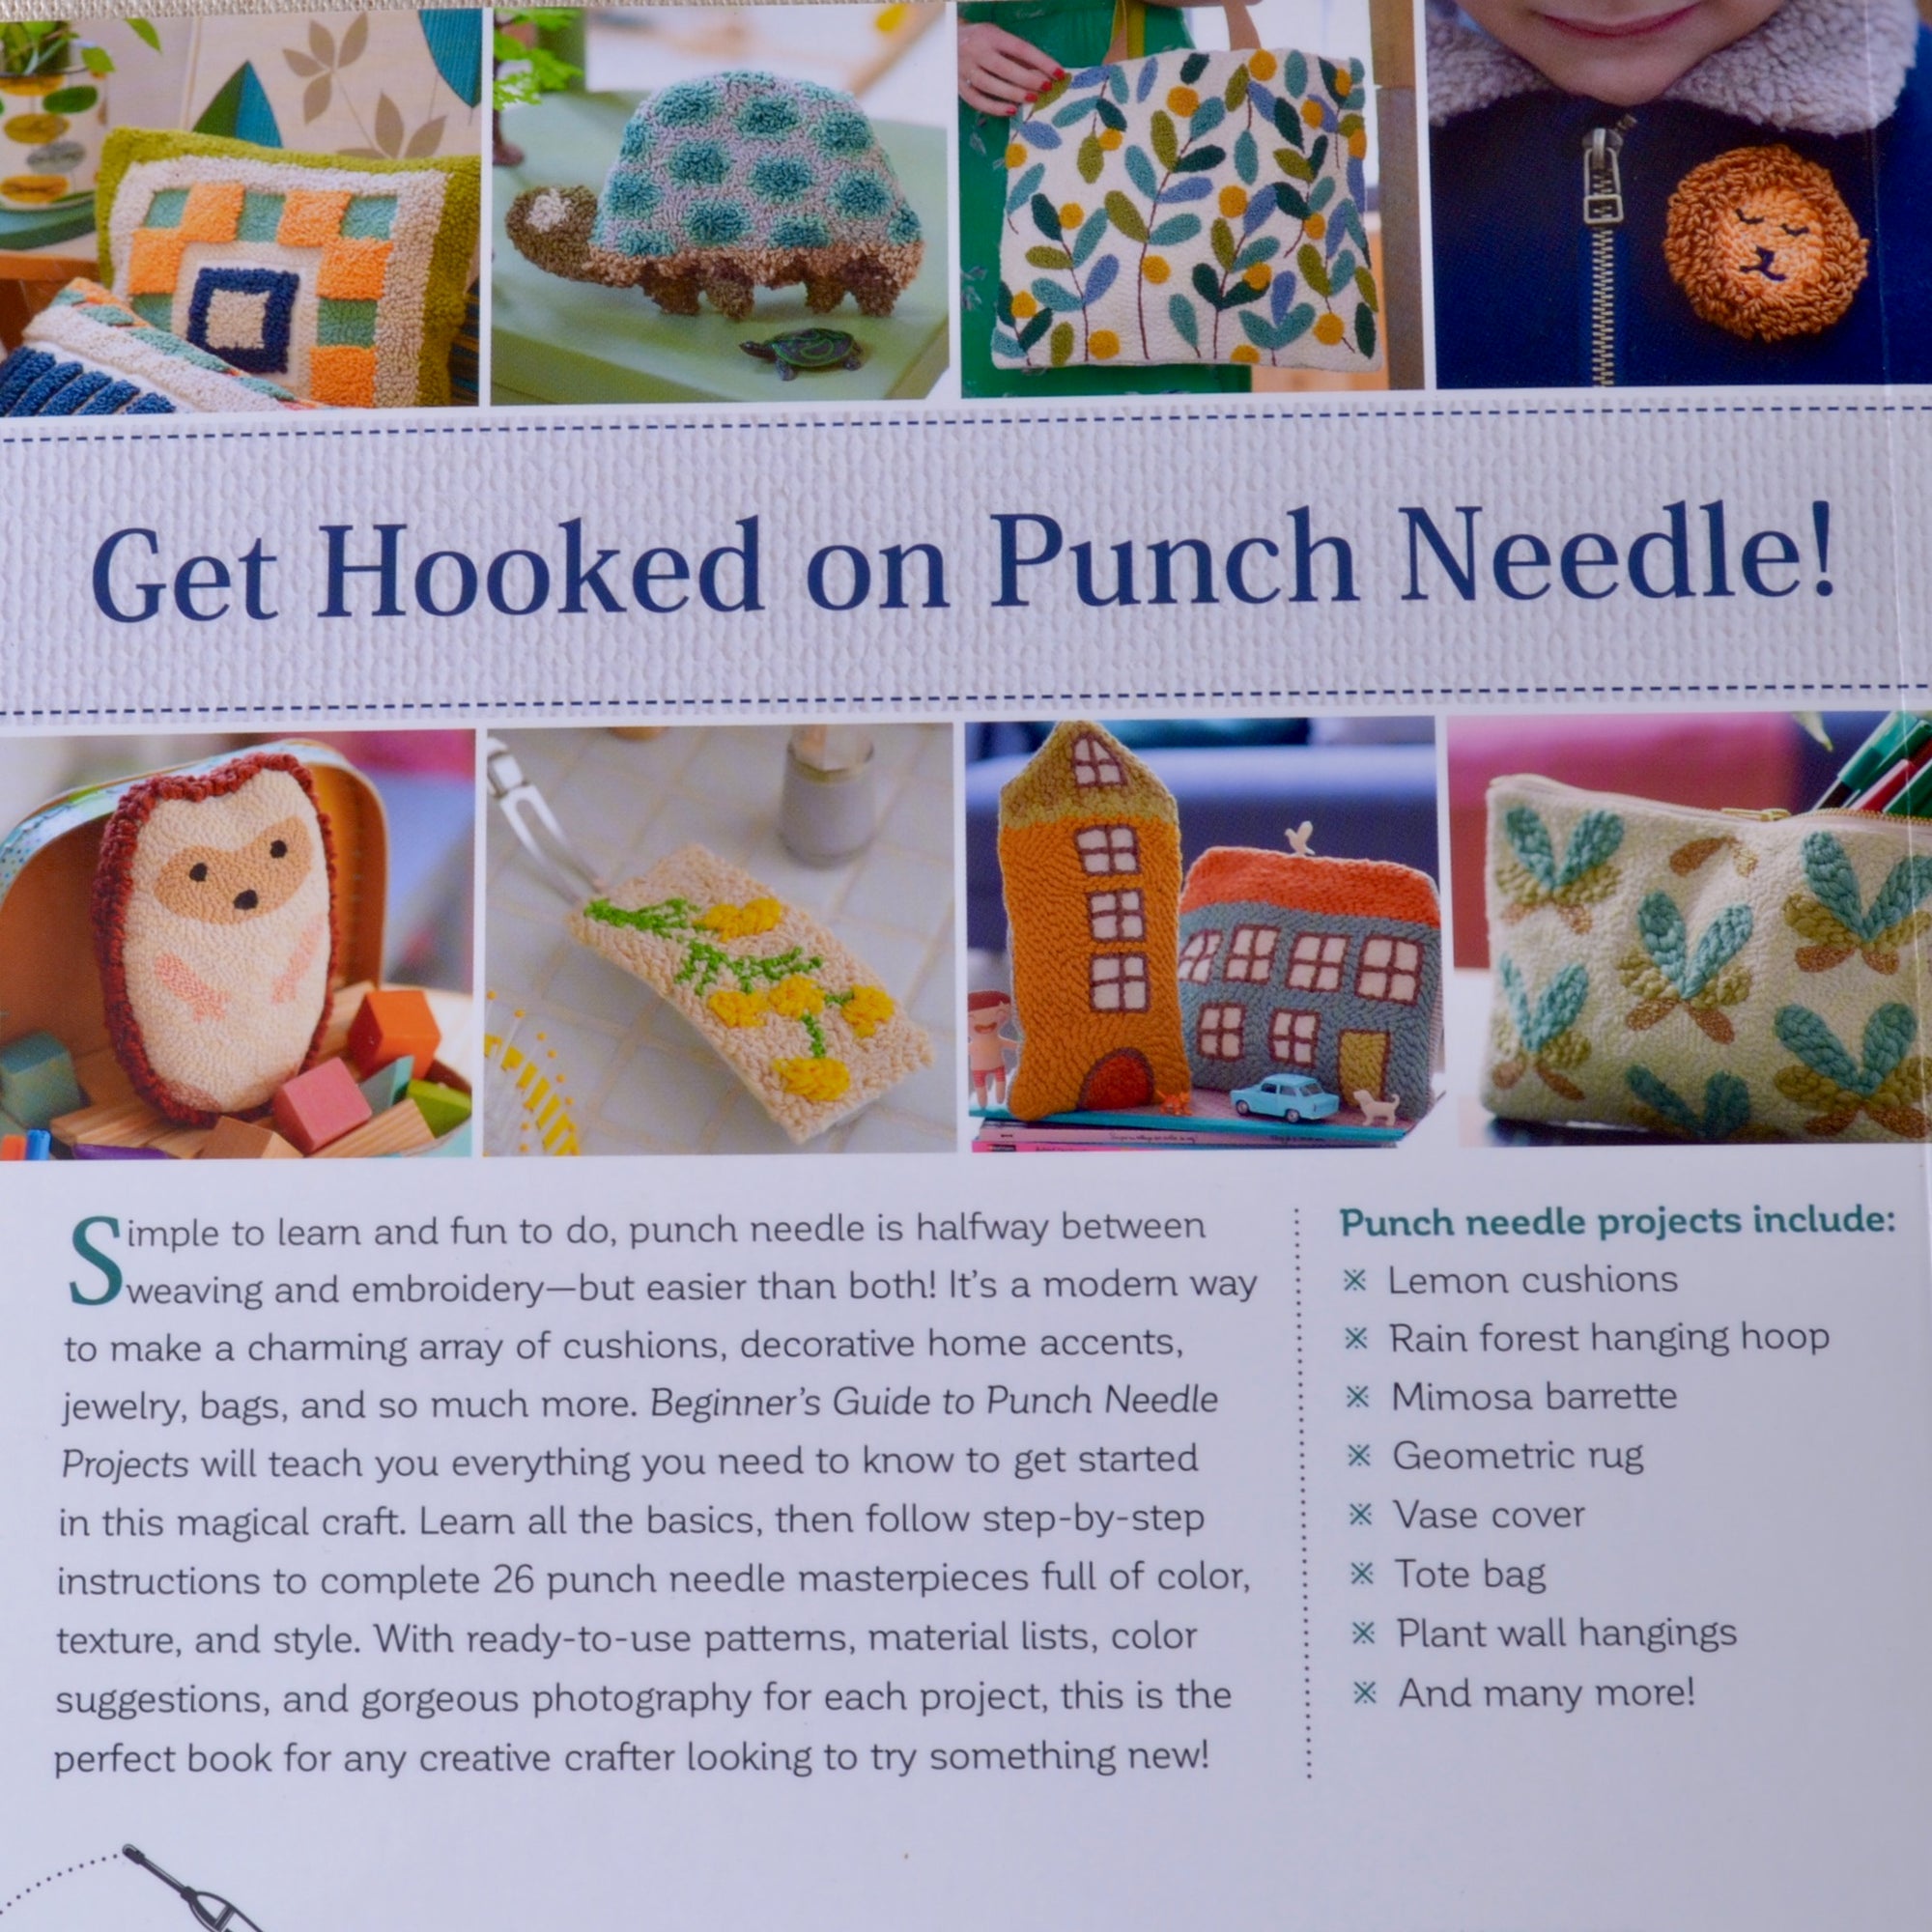 Beginners guide to punch needle